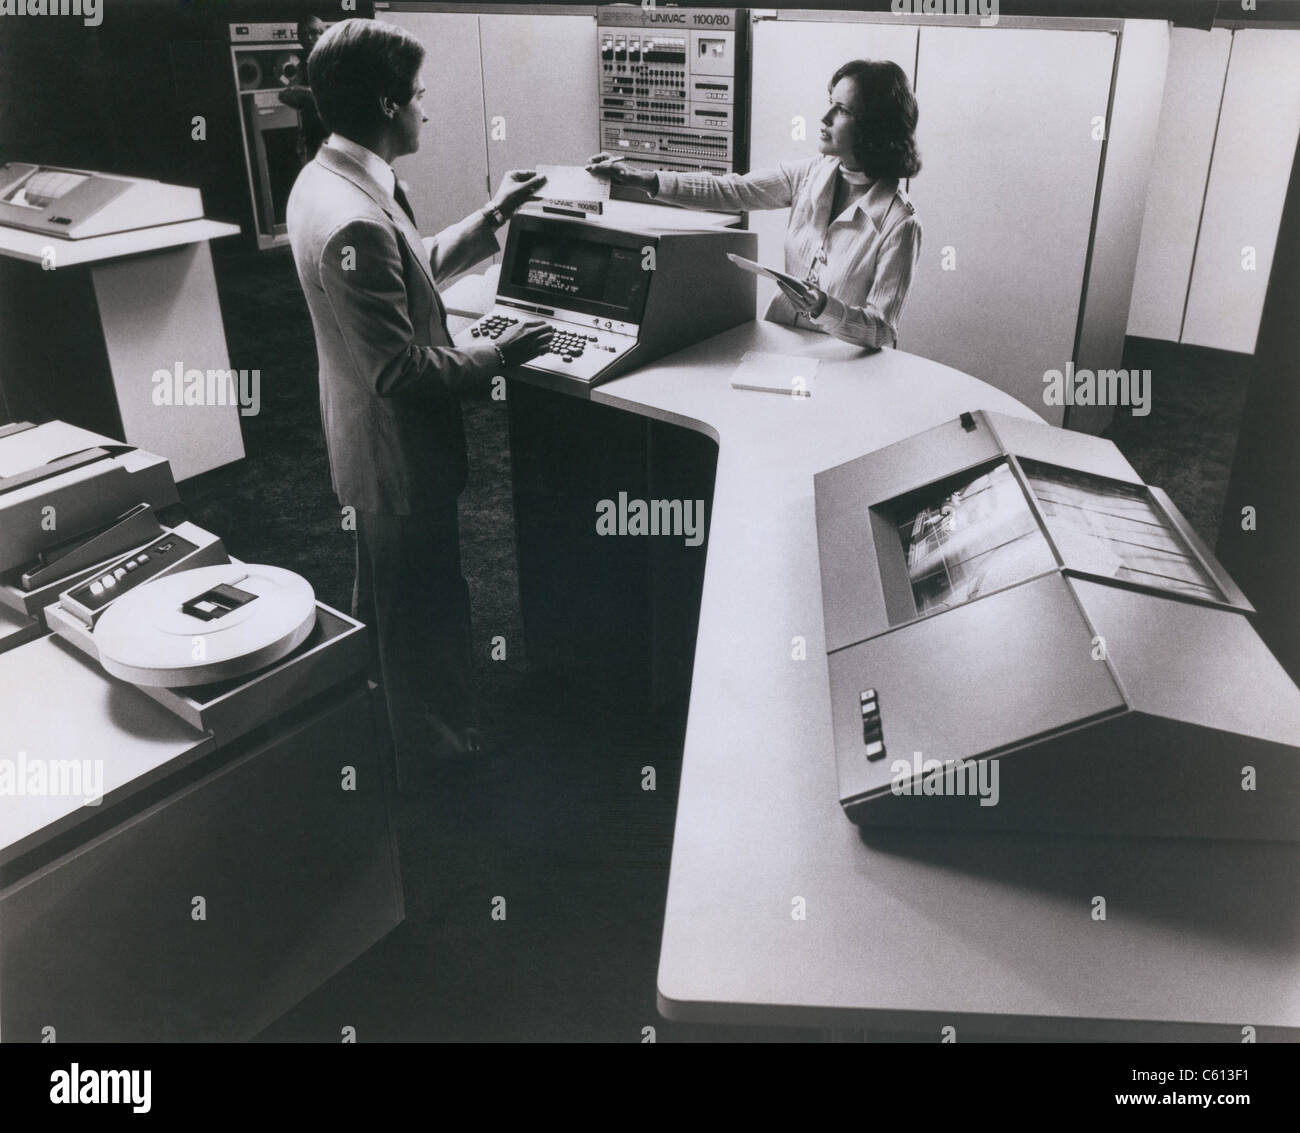 Mainframe computer Sperry UNIVAC 90/80 was released in 1976 by the Sperry Rand Corporation to compete with the IBM System 360 series of mainframe computers. Stock Photo